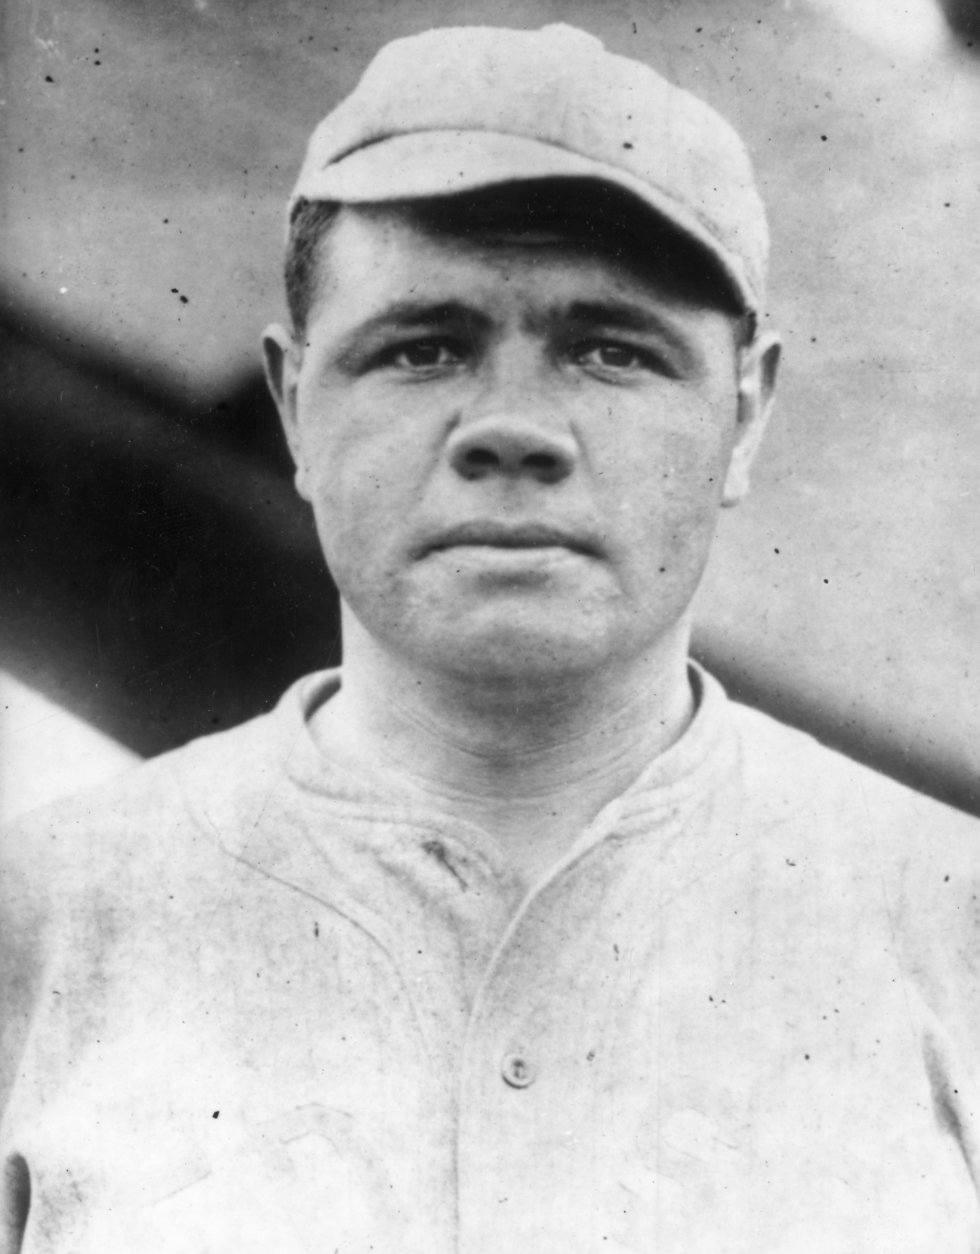 Babe Ruth (George Herman Ruth, 1895 - 1948) American professional baseball player for the Boston Red Sox, mid 1910s.  (Photo by Topical Press Agency/Getty Images)